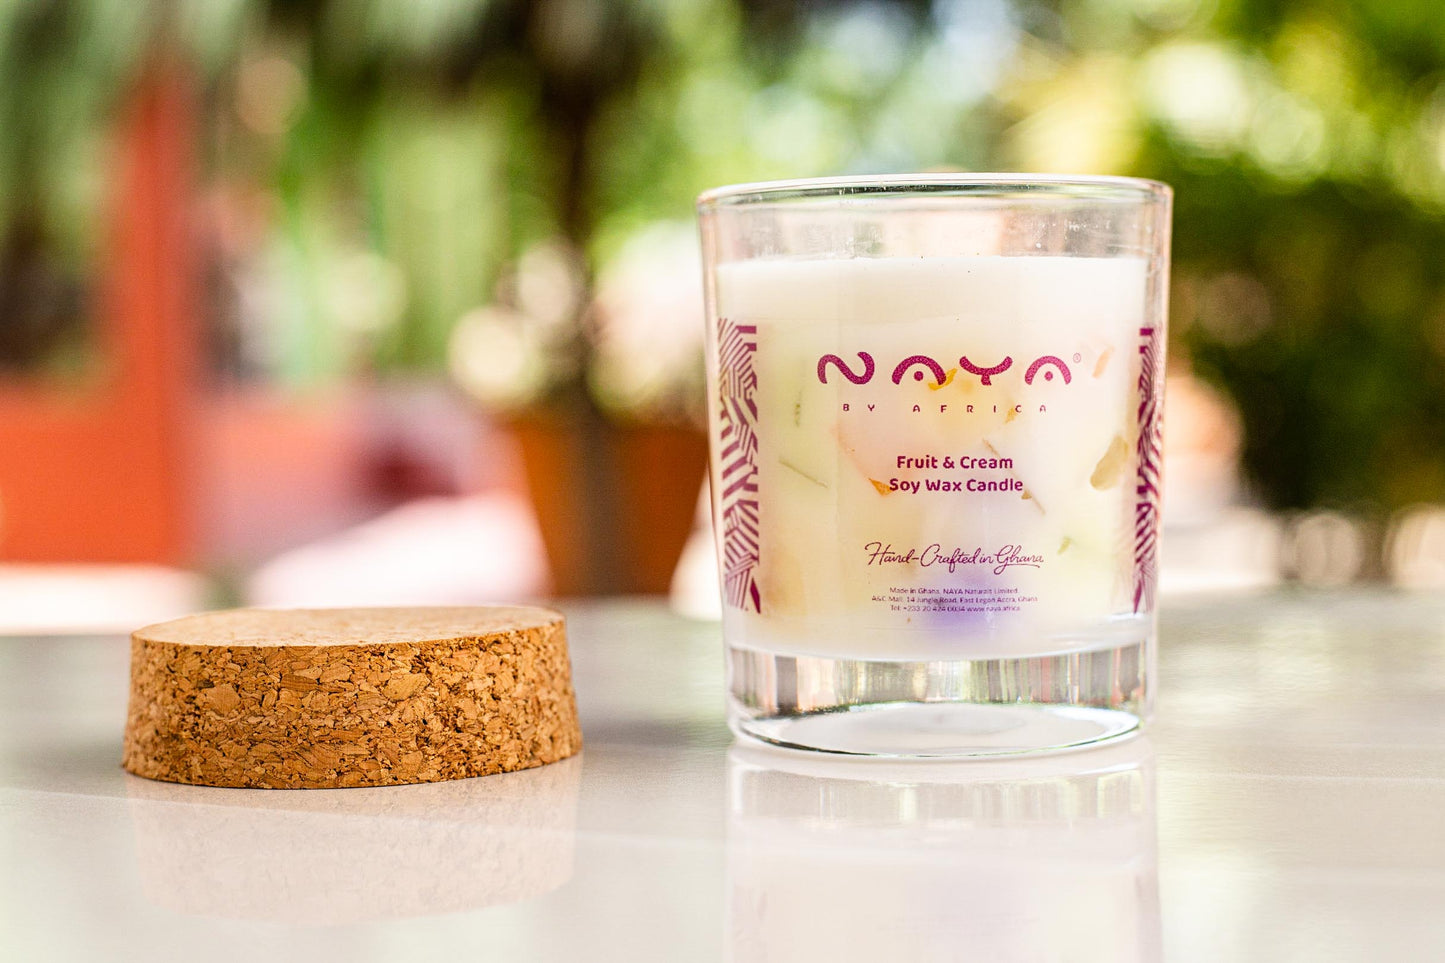 Fruit & Cream Soy Wax Candle